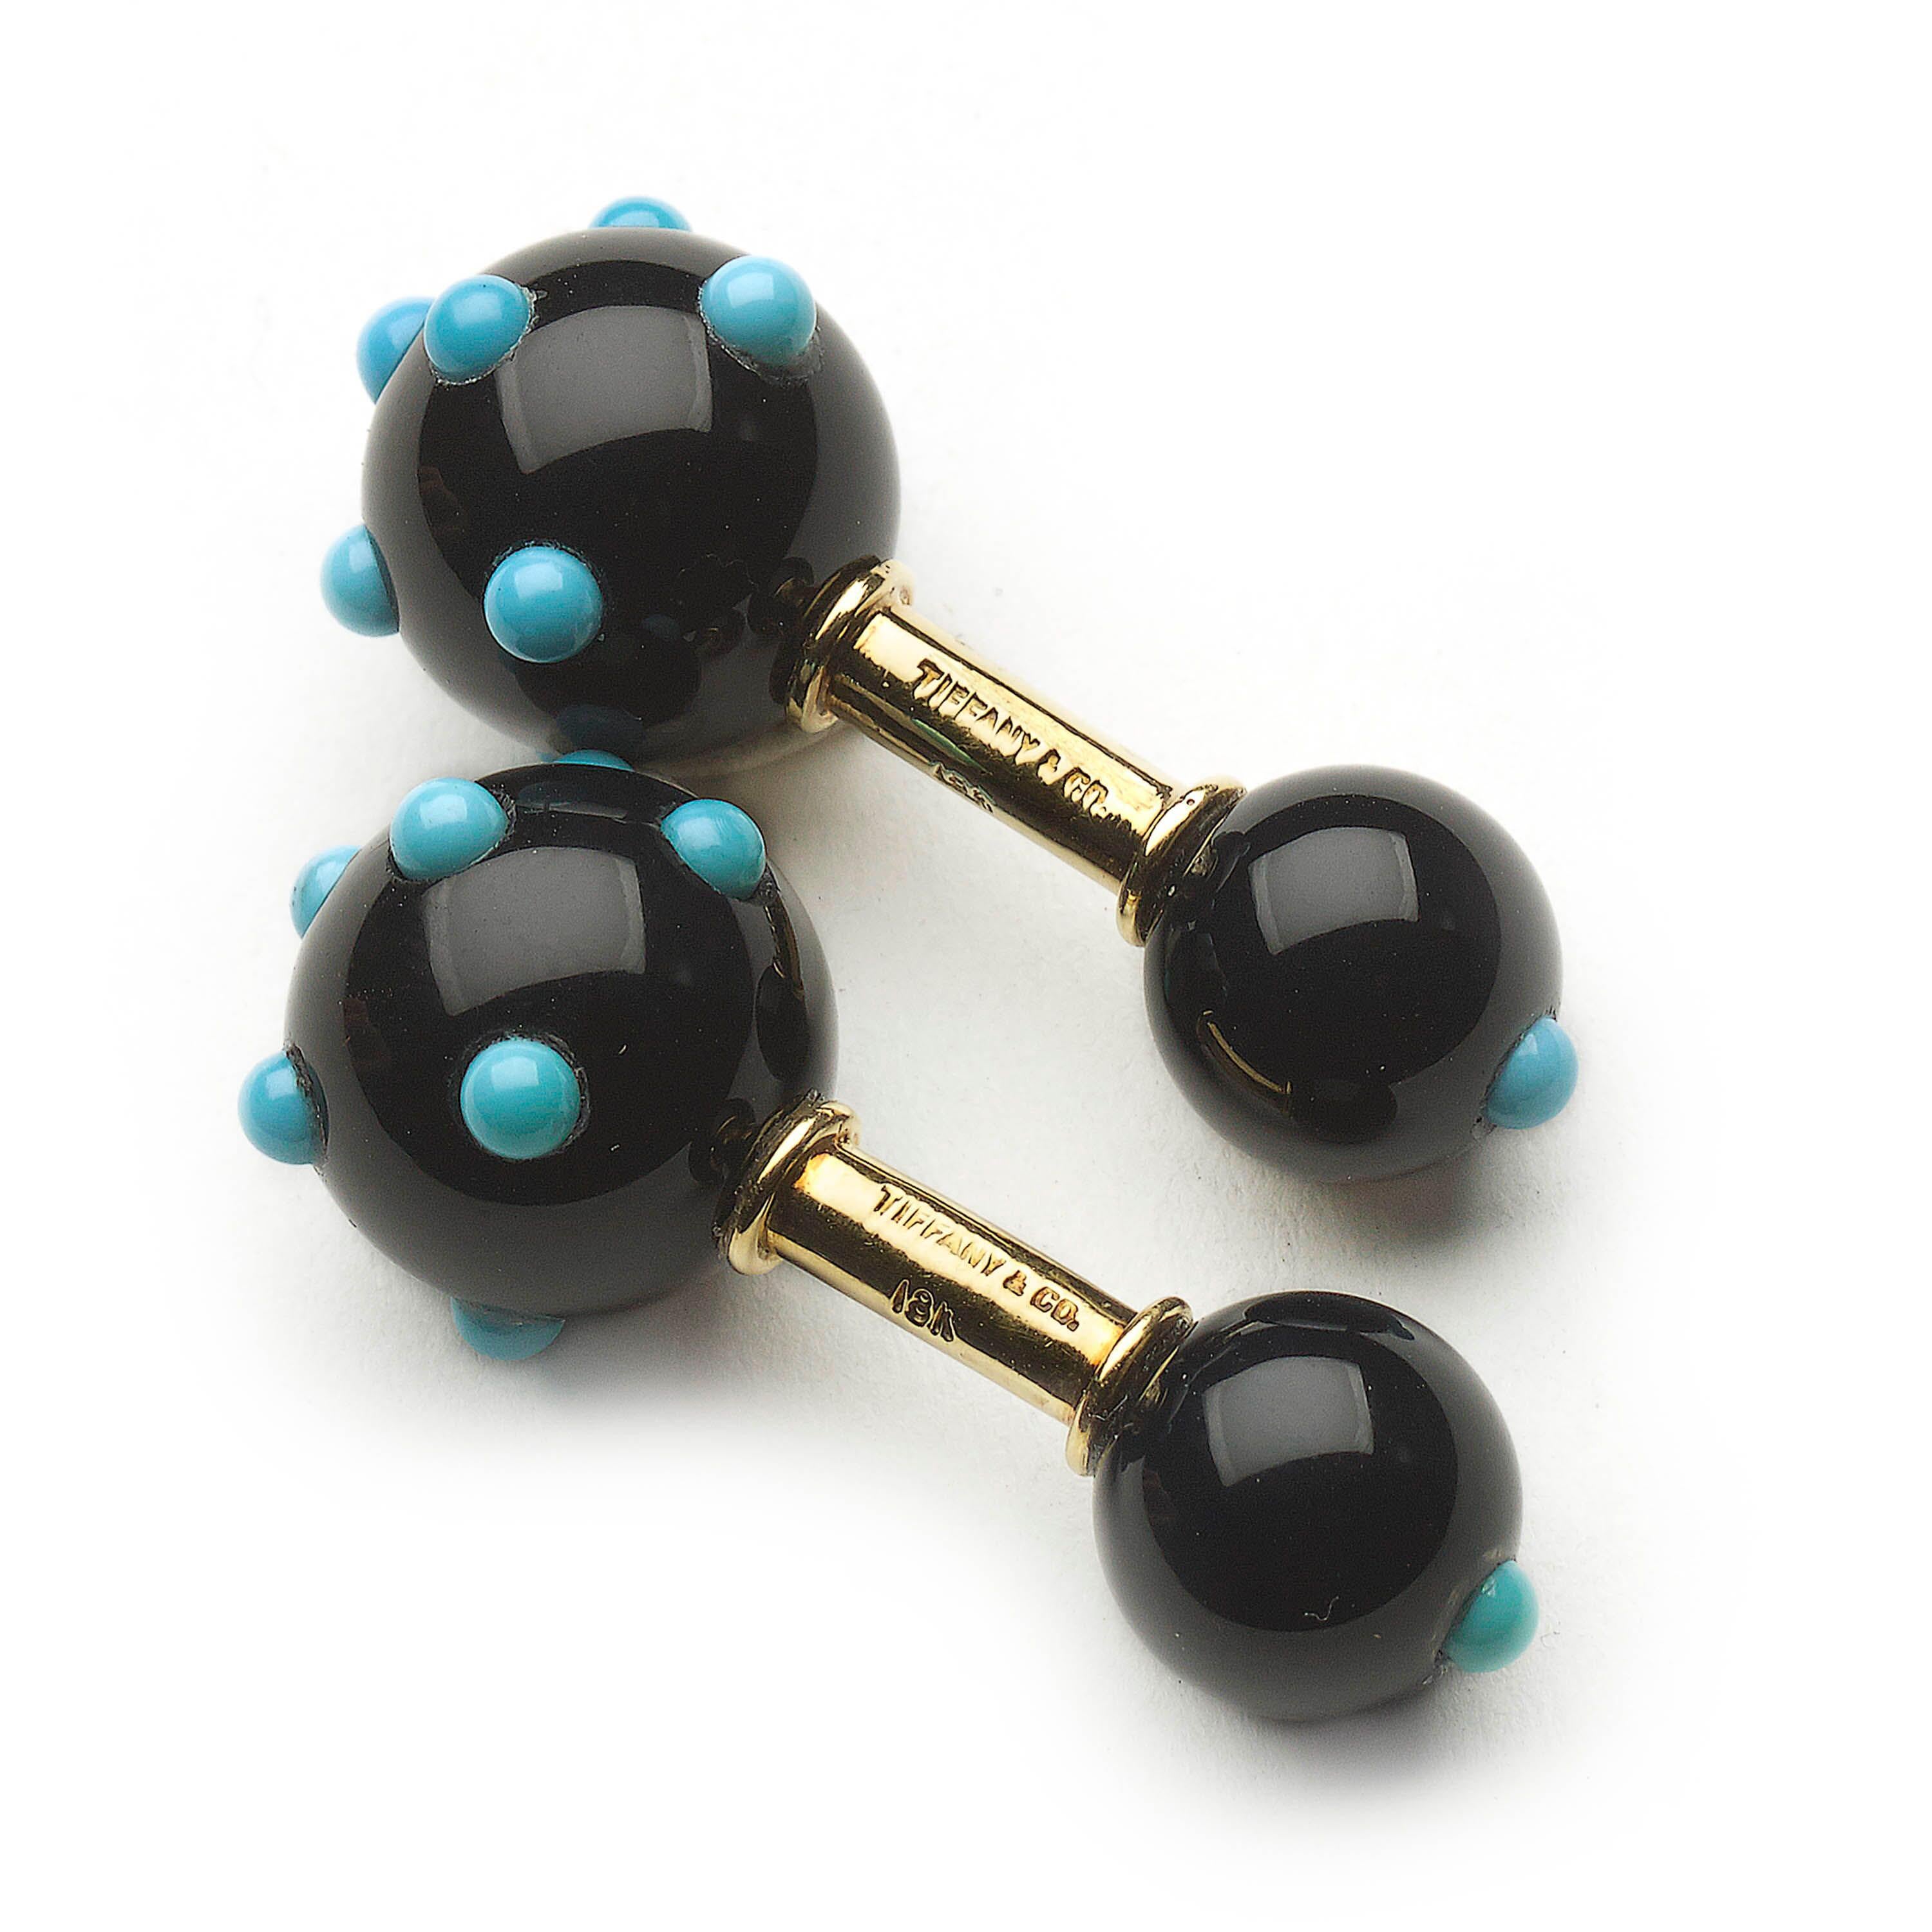 Modernist Tiffany Schlumberger Cufflinks with Black Onyx, Turquoise and Gold, Circa 1960 For Sale